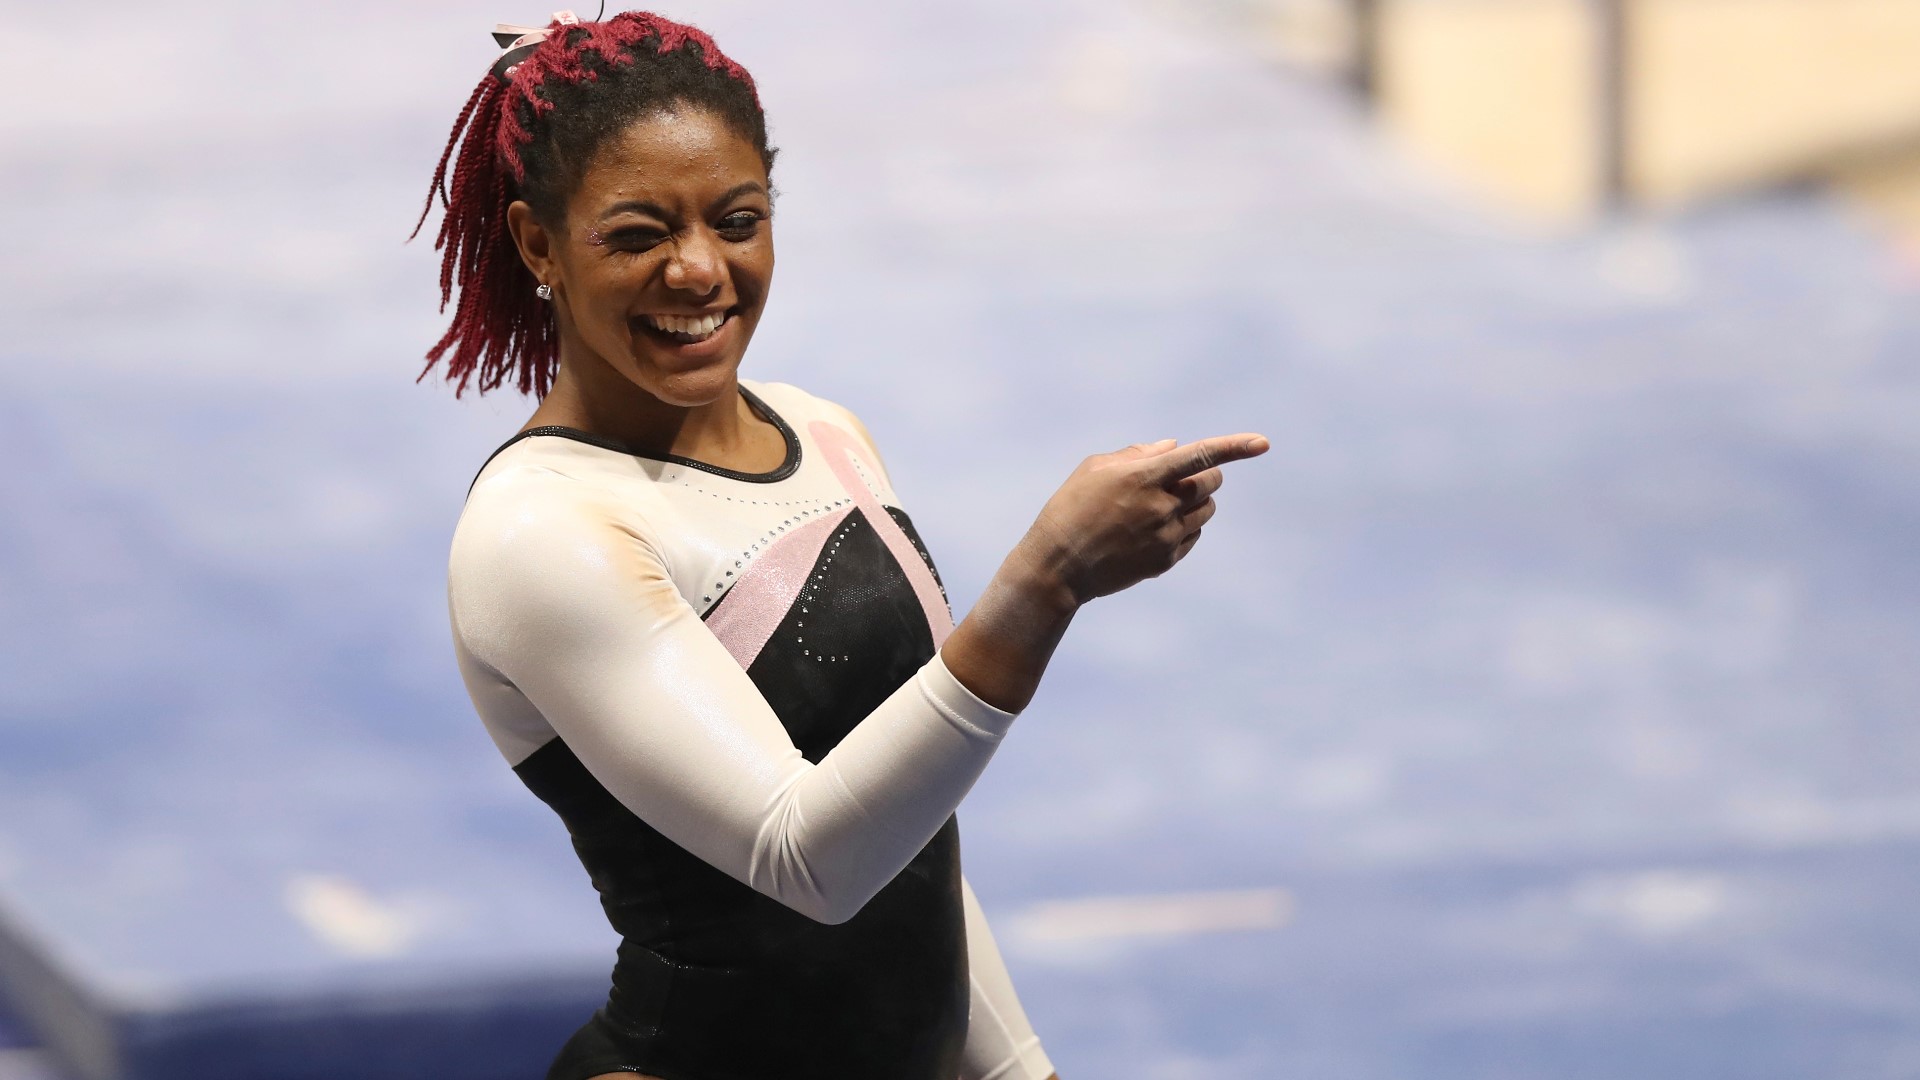 Lynnzee Brown is a national champion on the Denver Gymnastics team. While she celebrates the steps taken to make the sport more diverse, there's more work to do.